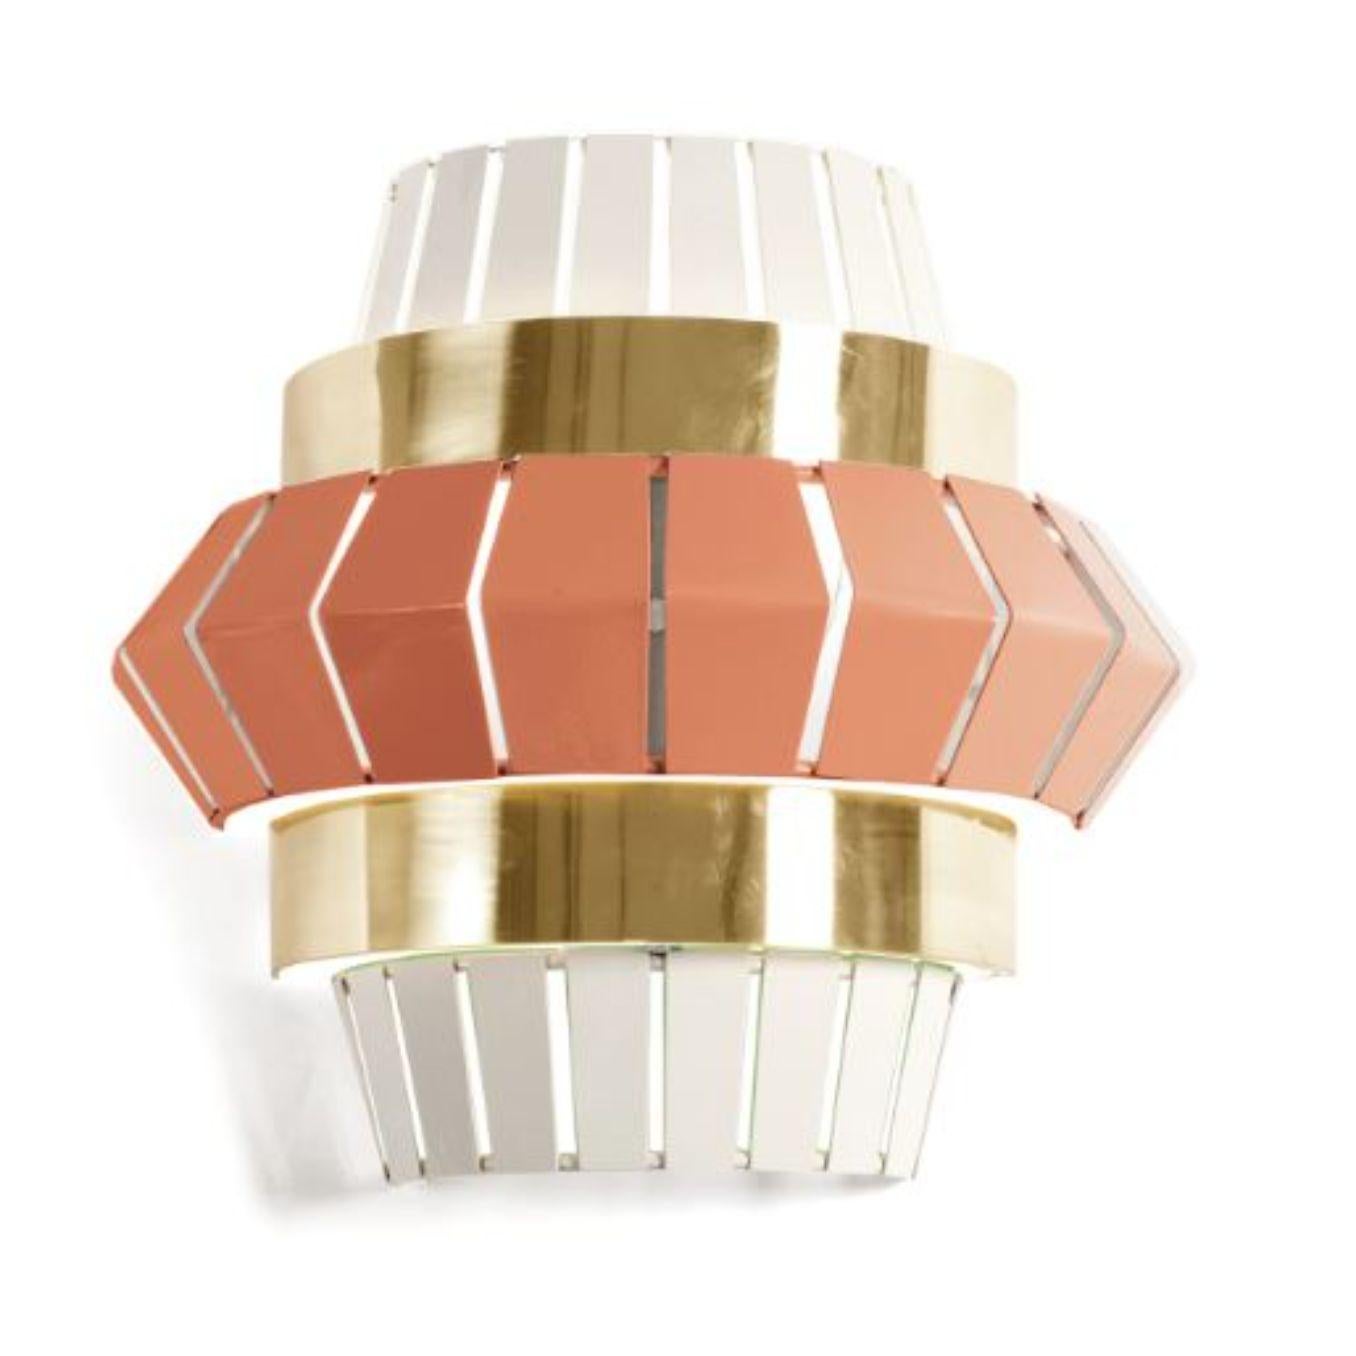 Ivory and Salmon comb wall lamp with brass ring by Dooq
Dimensions: W 37 x D 13 x H 34 cm
Materials: lacquered metal, polished brass.
Also available in different colors and materials.

Information:
230V/50Hz
E14/1x20W LED
120V/60Hz
E12/1x15W